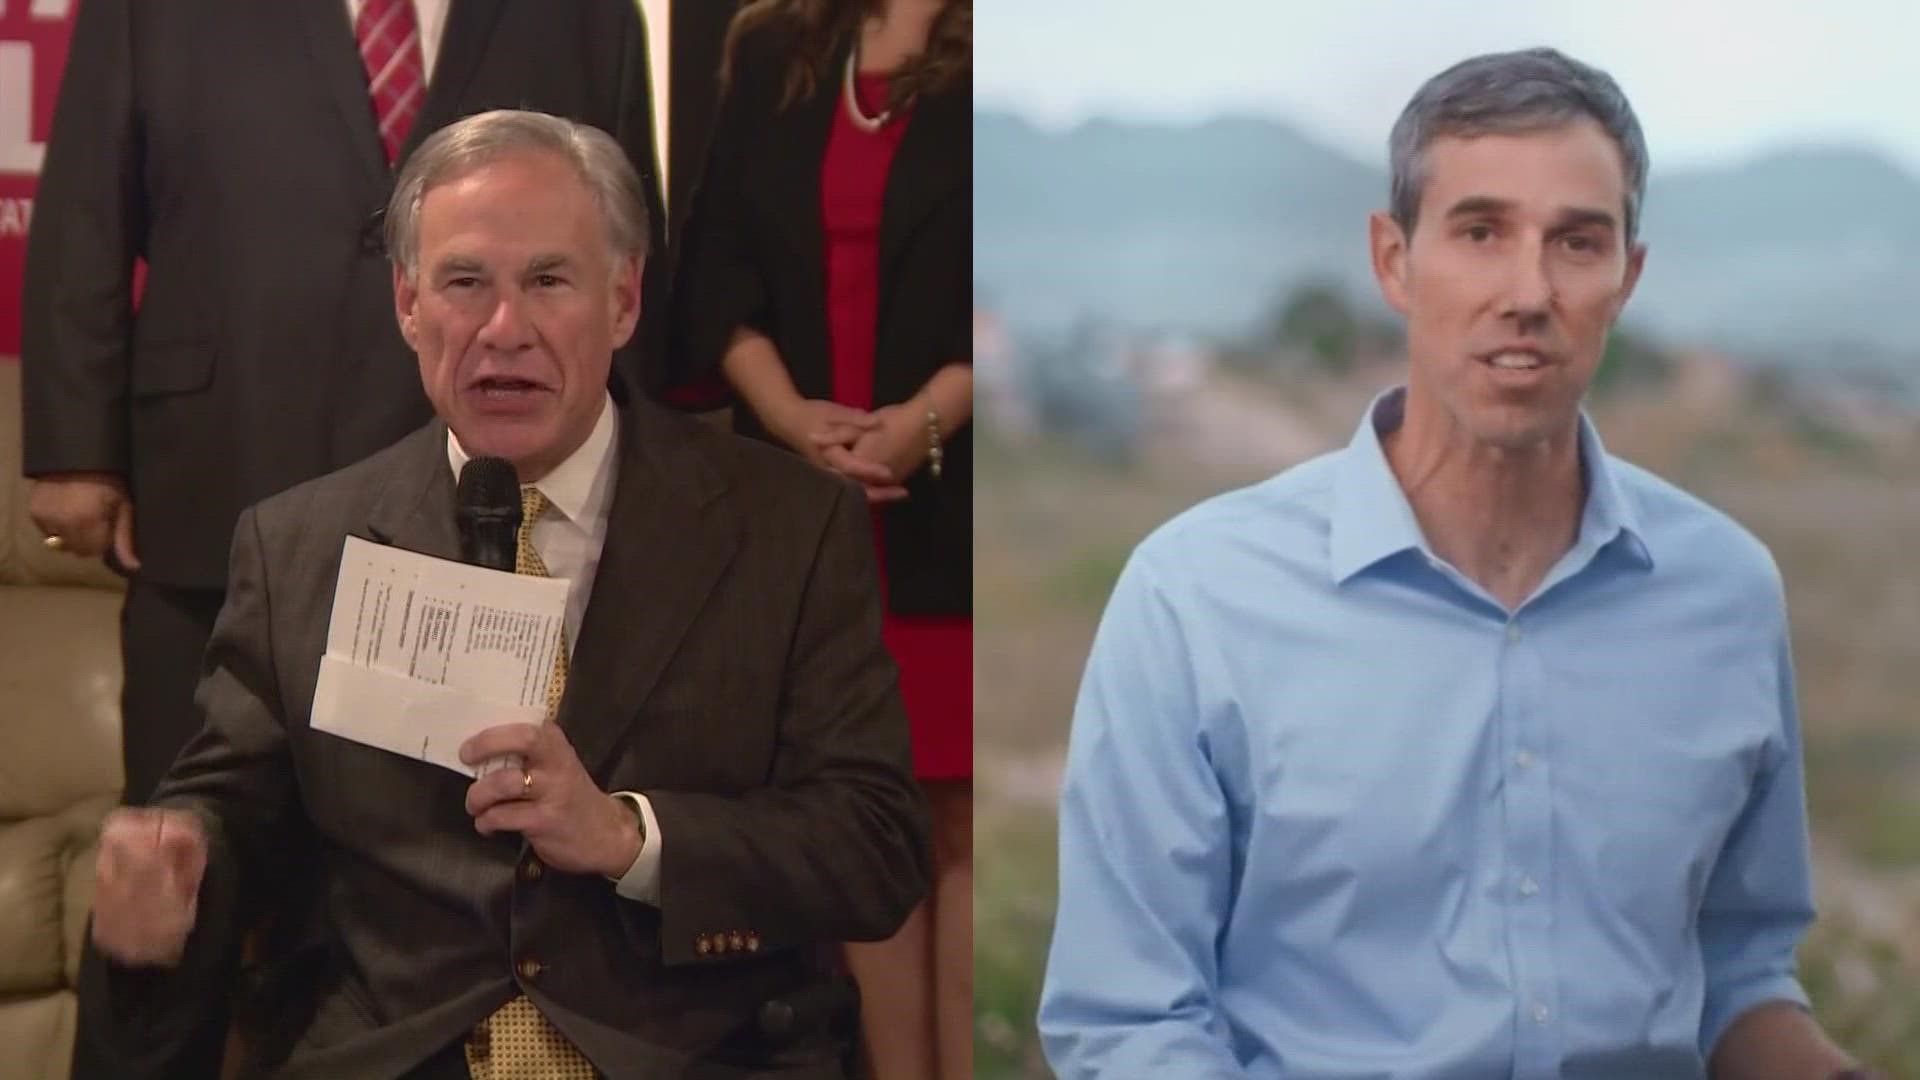 Gov. Greg Abbott and Beto O'Rourke made a lot of claims during their debate. We fact-checked those claims.